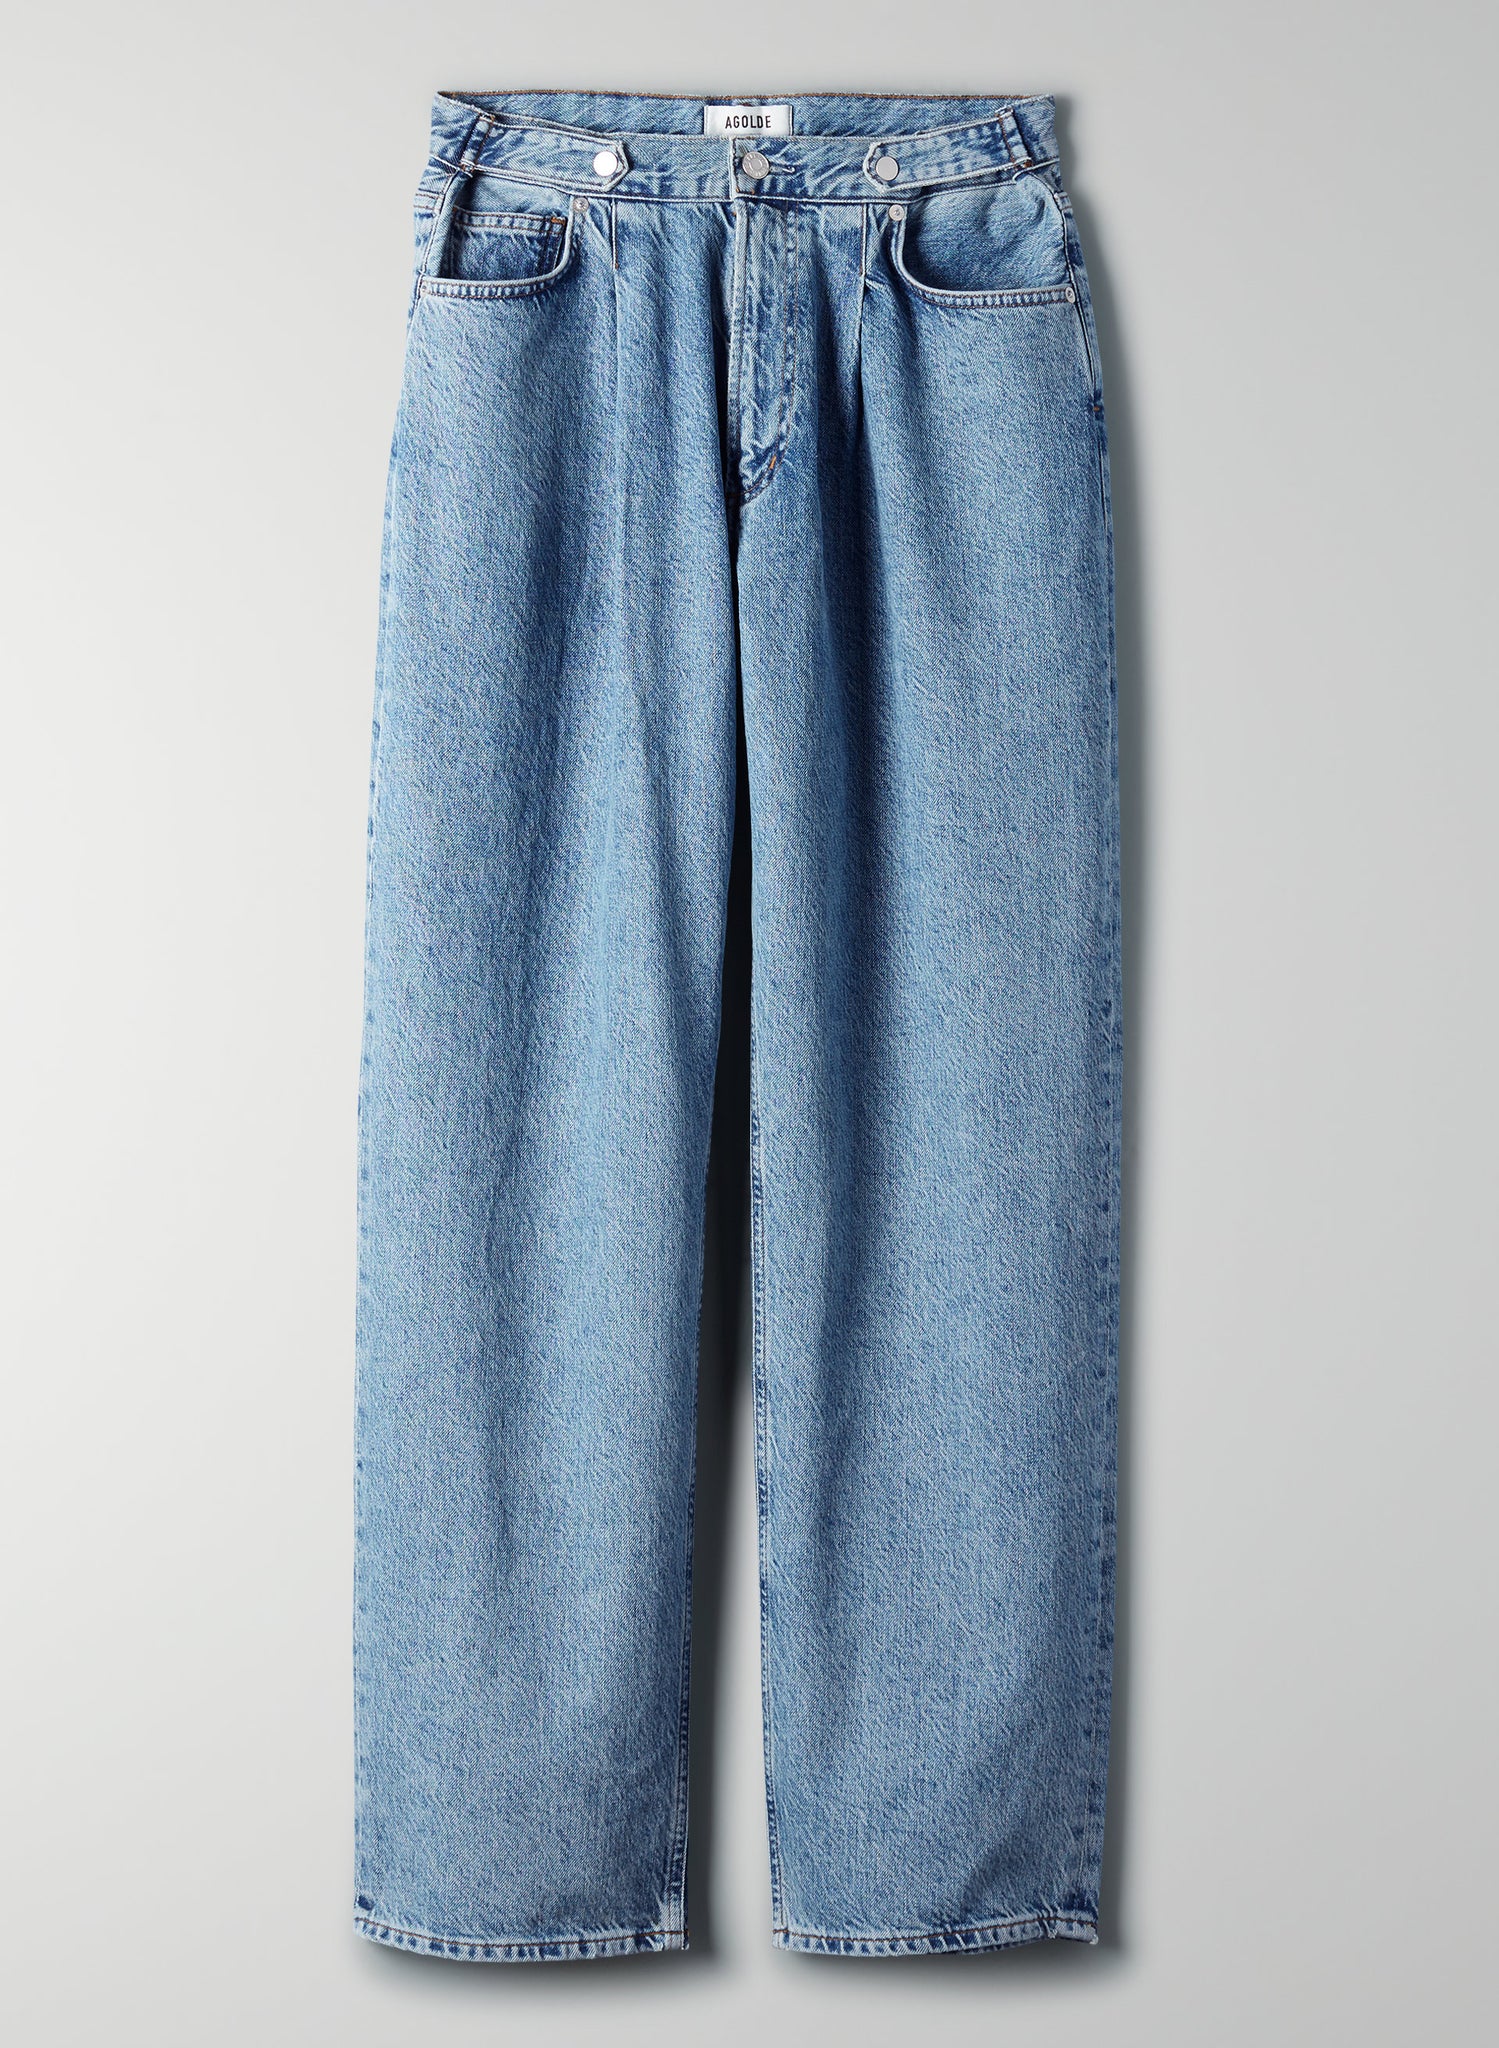 BAGGY PLEATED OVERSIZED JEANS BY AGOLDE